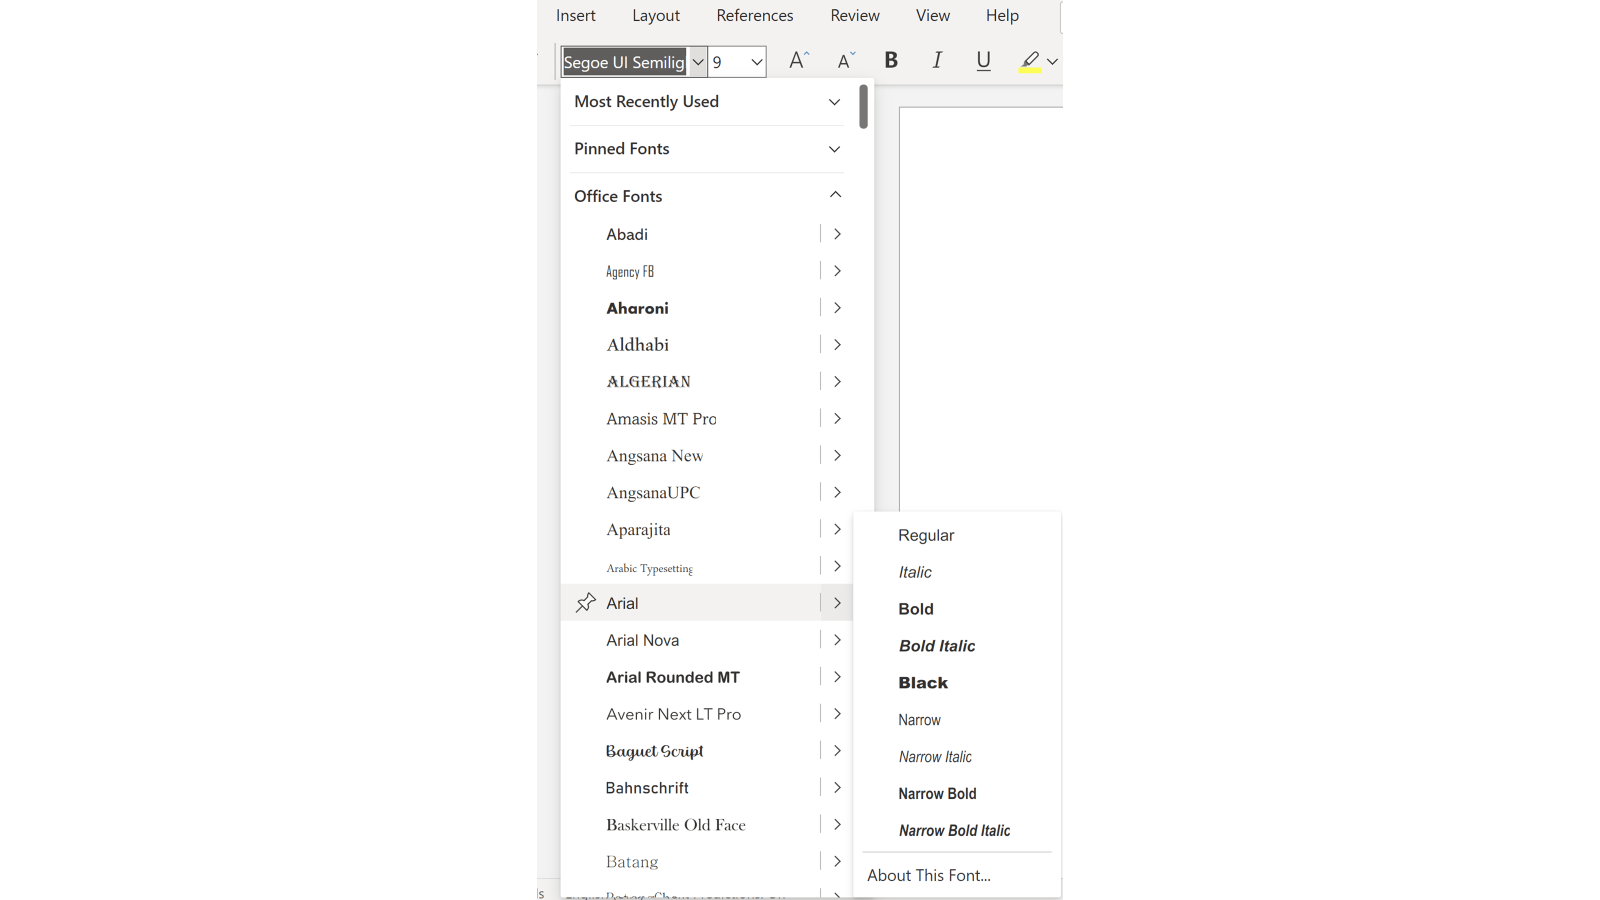 Screenshot of the font drop down list. The font Arial is selected and a fly out menu on the right lists the different Arial styles e.g. regular, italic, bold.